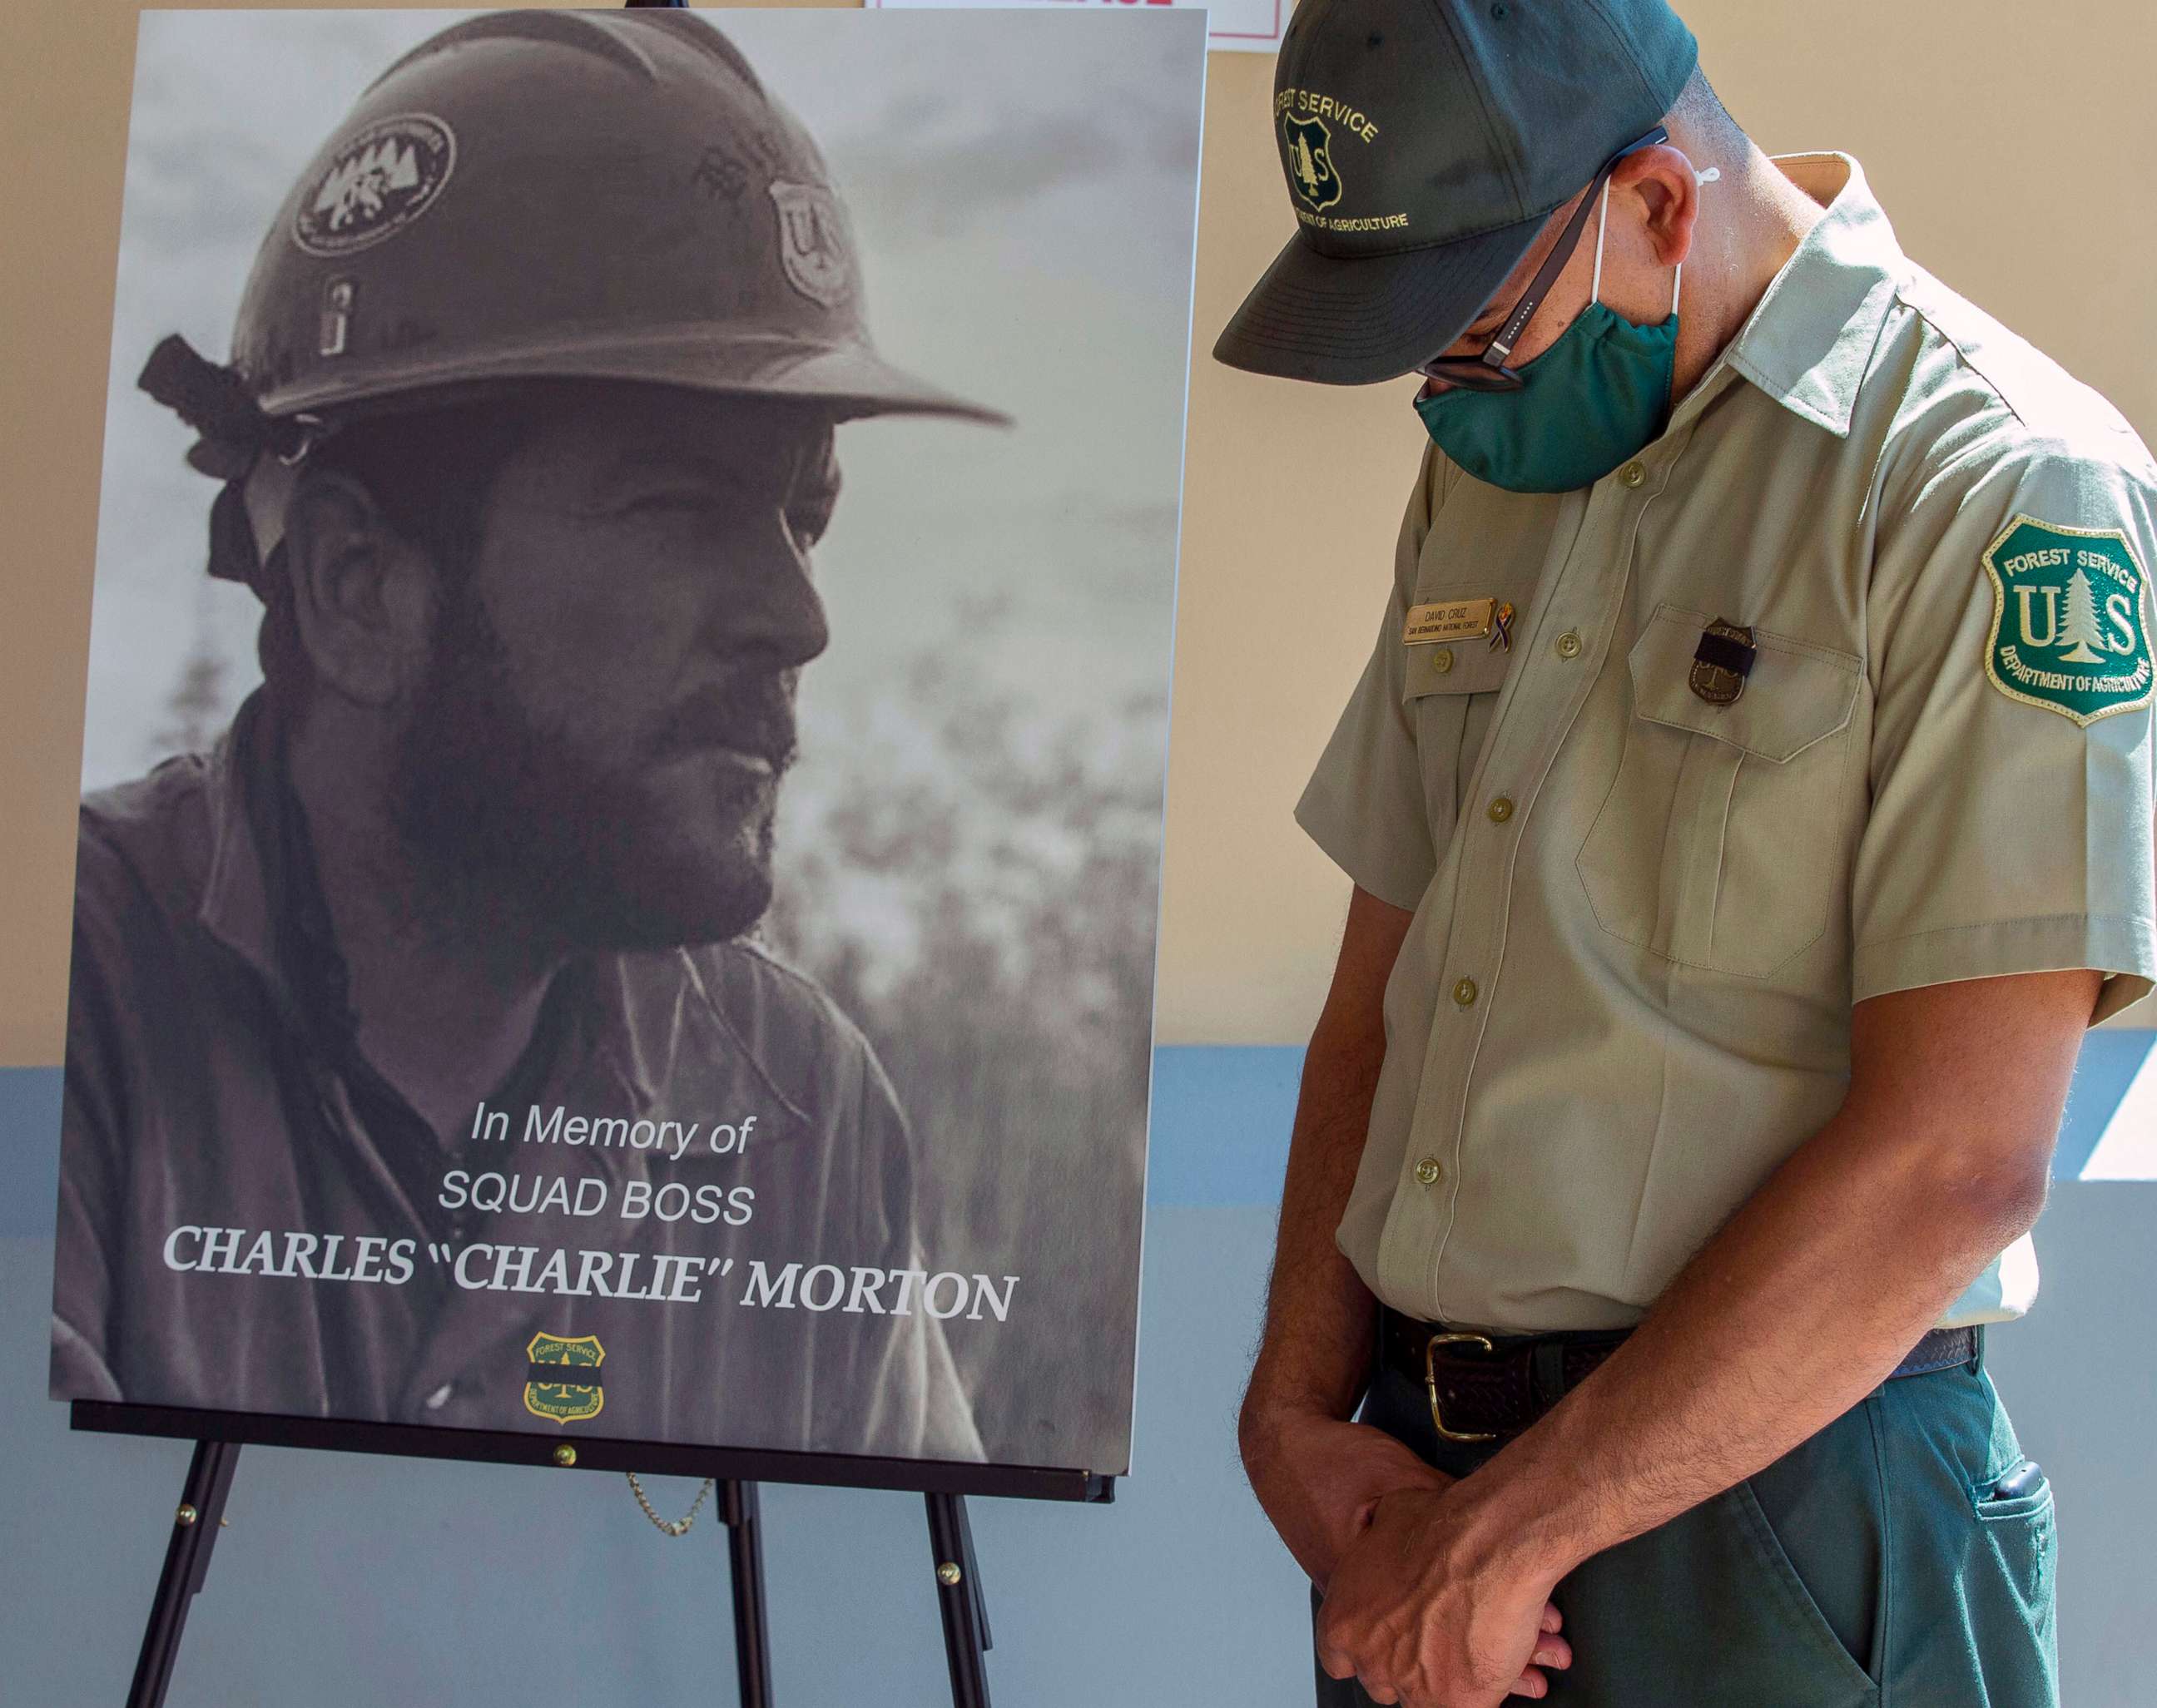 PHOTO: Firefighter David Cruz attends a memorial, Sept. 25, 2020, for Charles Morton, the U.S. Forest Service firefighter killed in the line of duty on the El Dorado Fire at The Rock Church in San Bernardino, Calif.